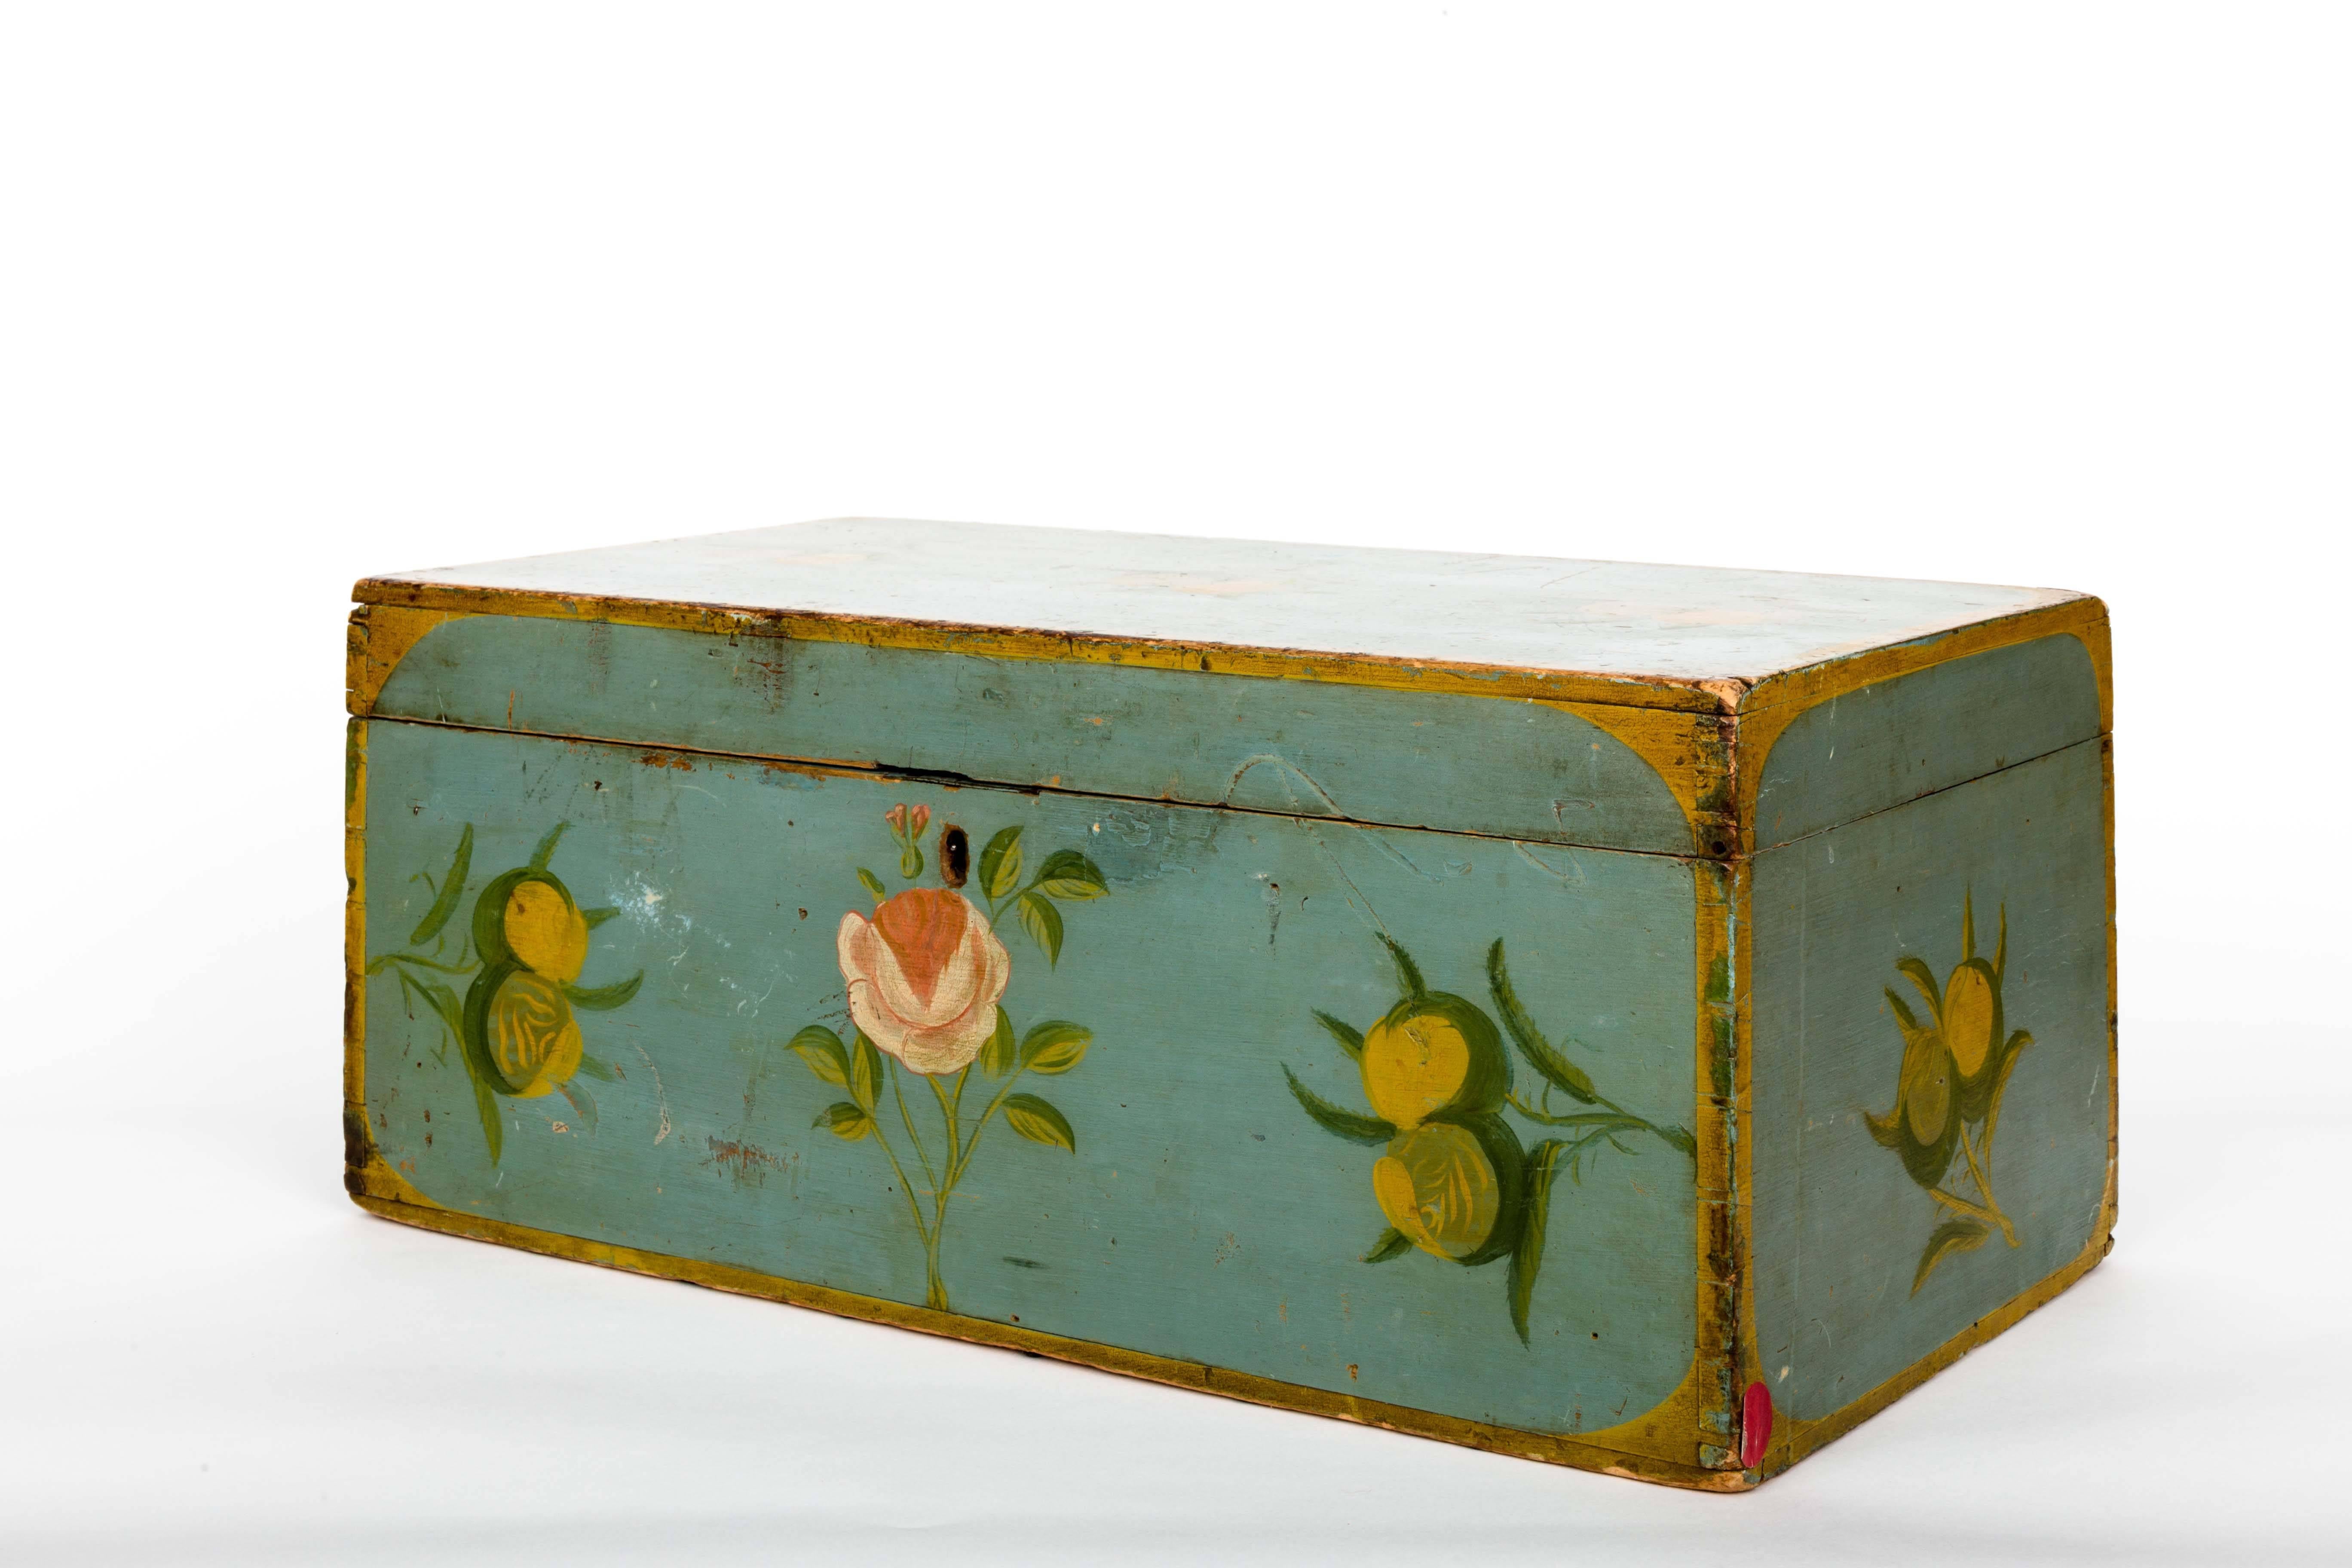 Painted American Folk Art Box In Excellent Condition For Sale In New York City, NY